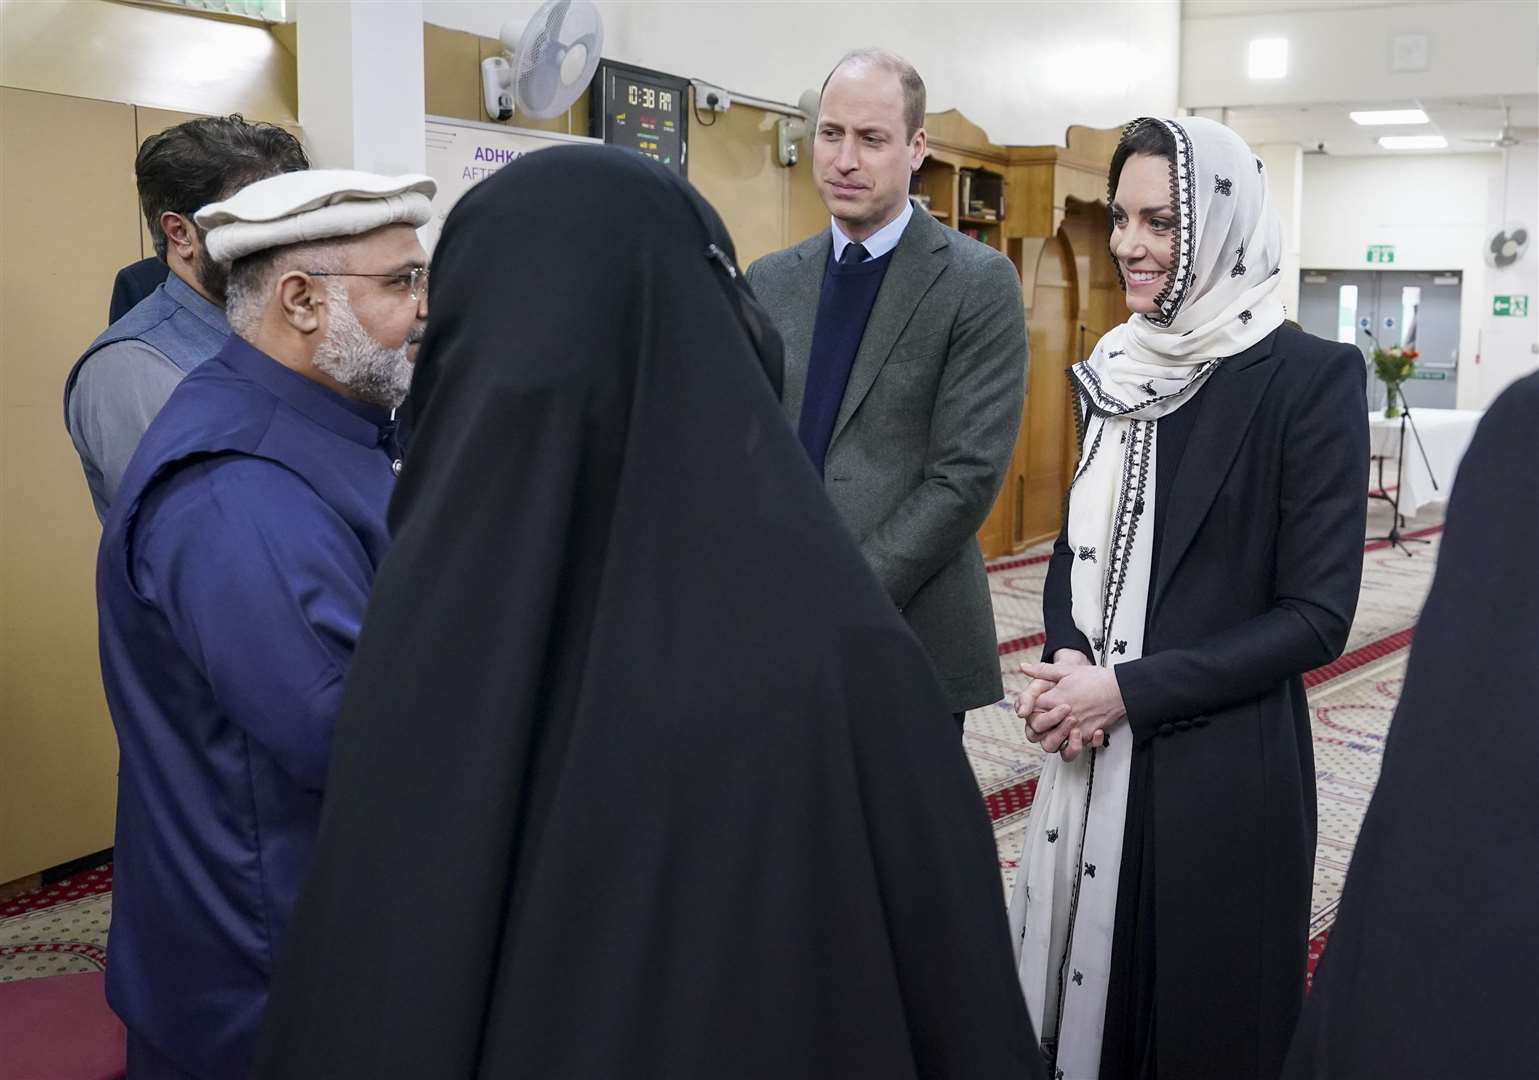 The Prince and Princess of Wales during a visit to the Hayes Muslim Centre in west London (Arthur Edwards/The Sun/PA)